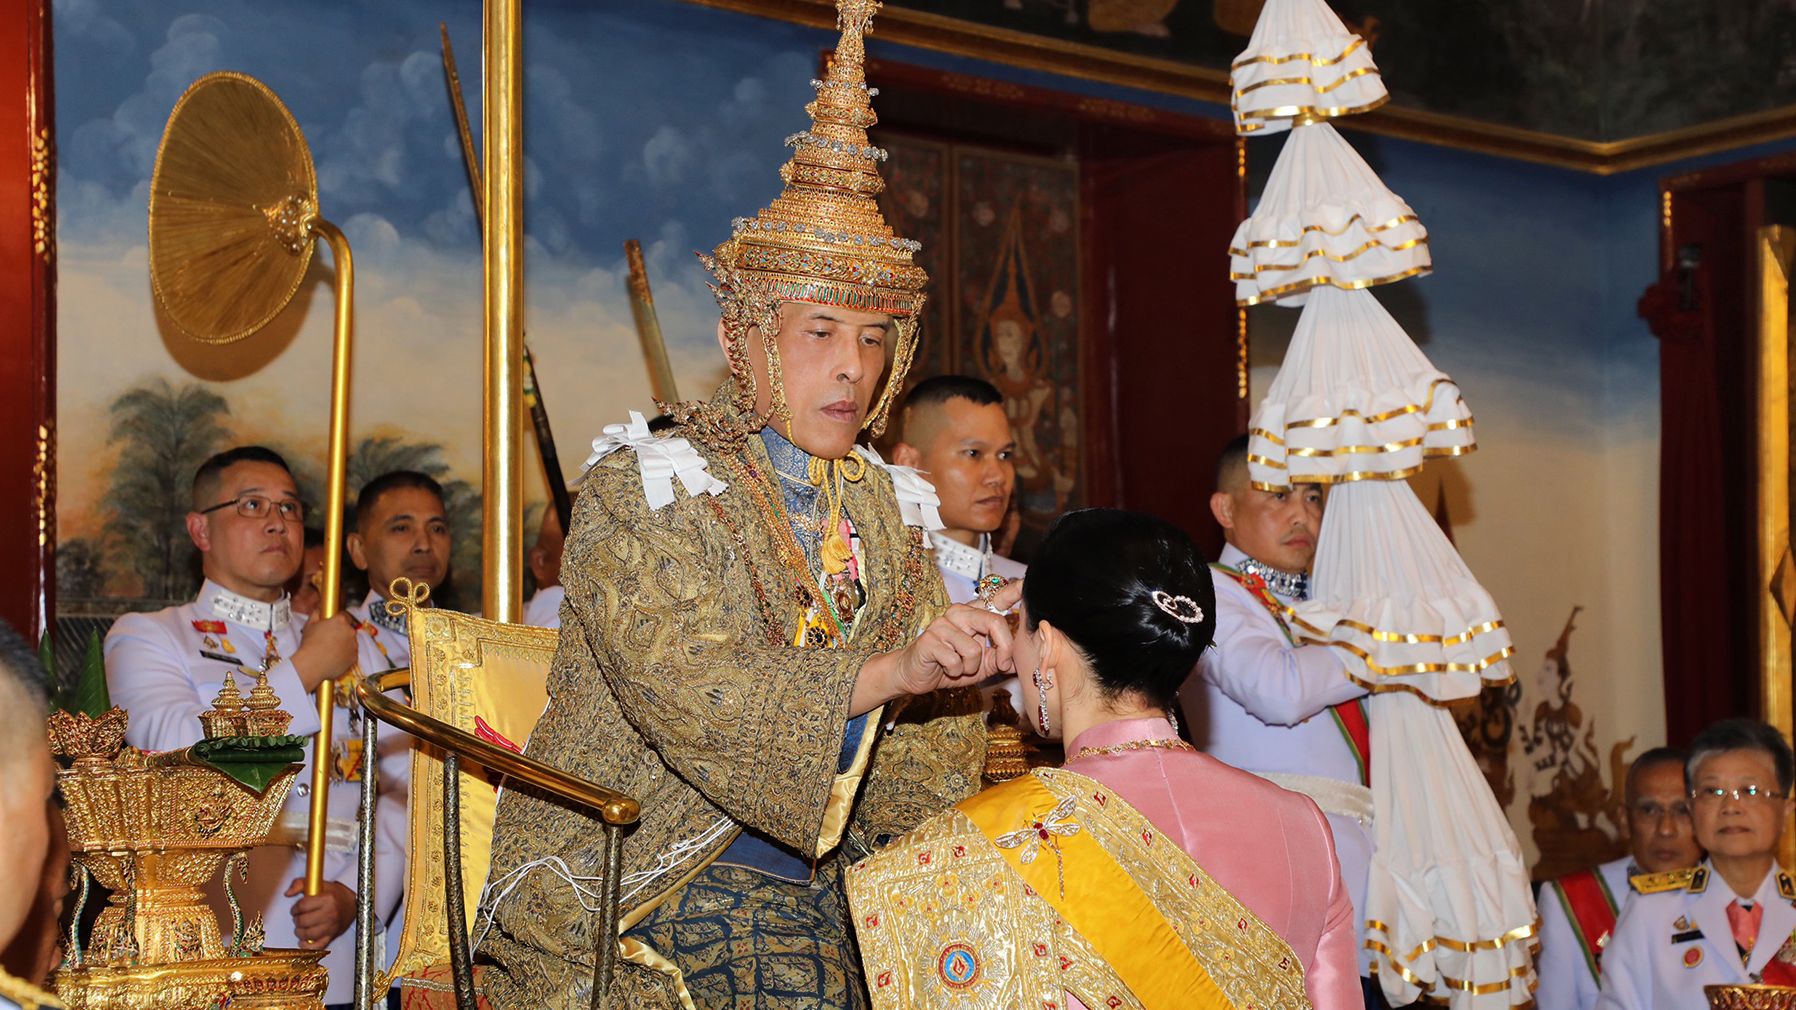 King Vajiralongkorn anoints Queen Suthida at the Grand Palace on May 4.